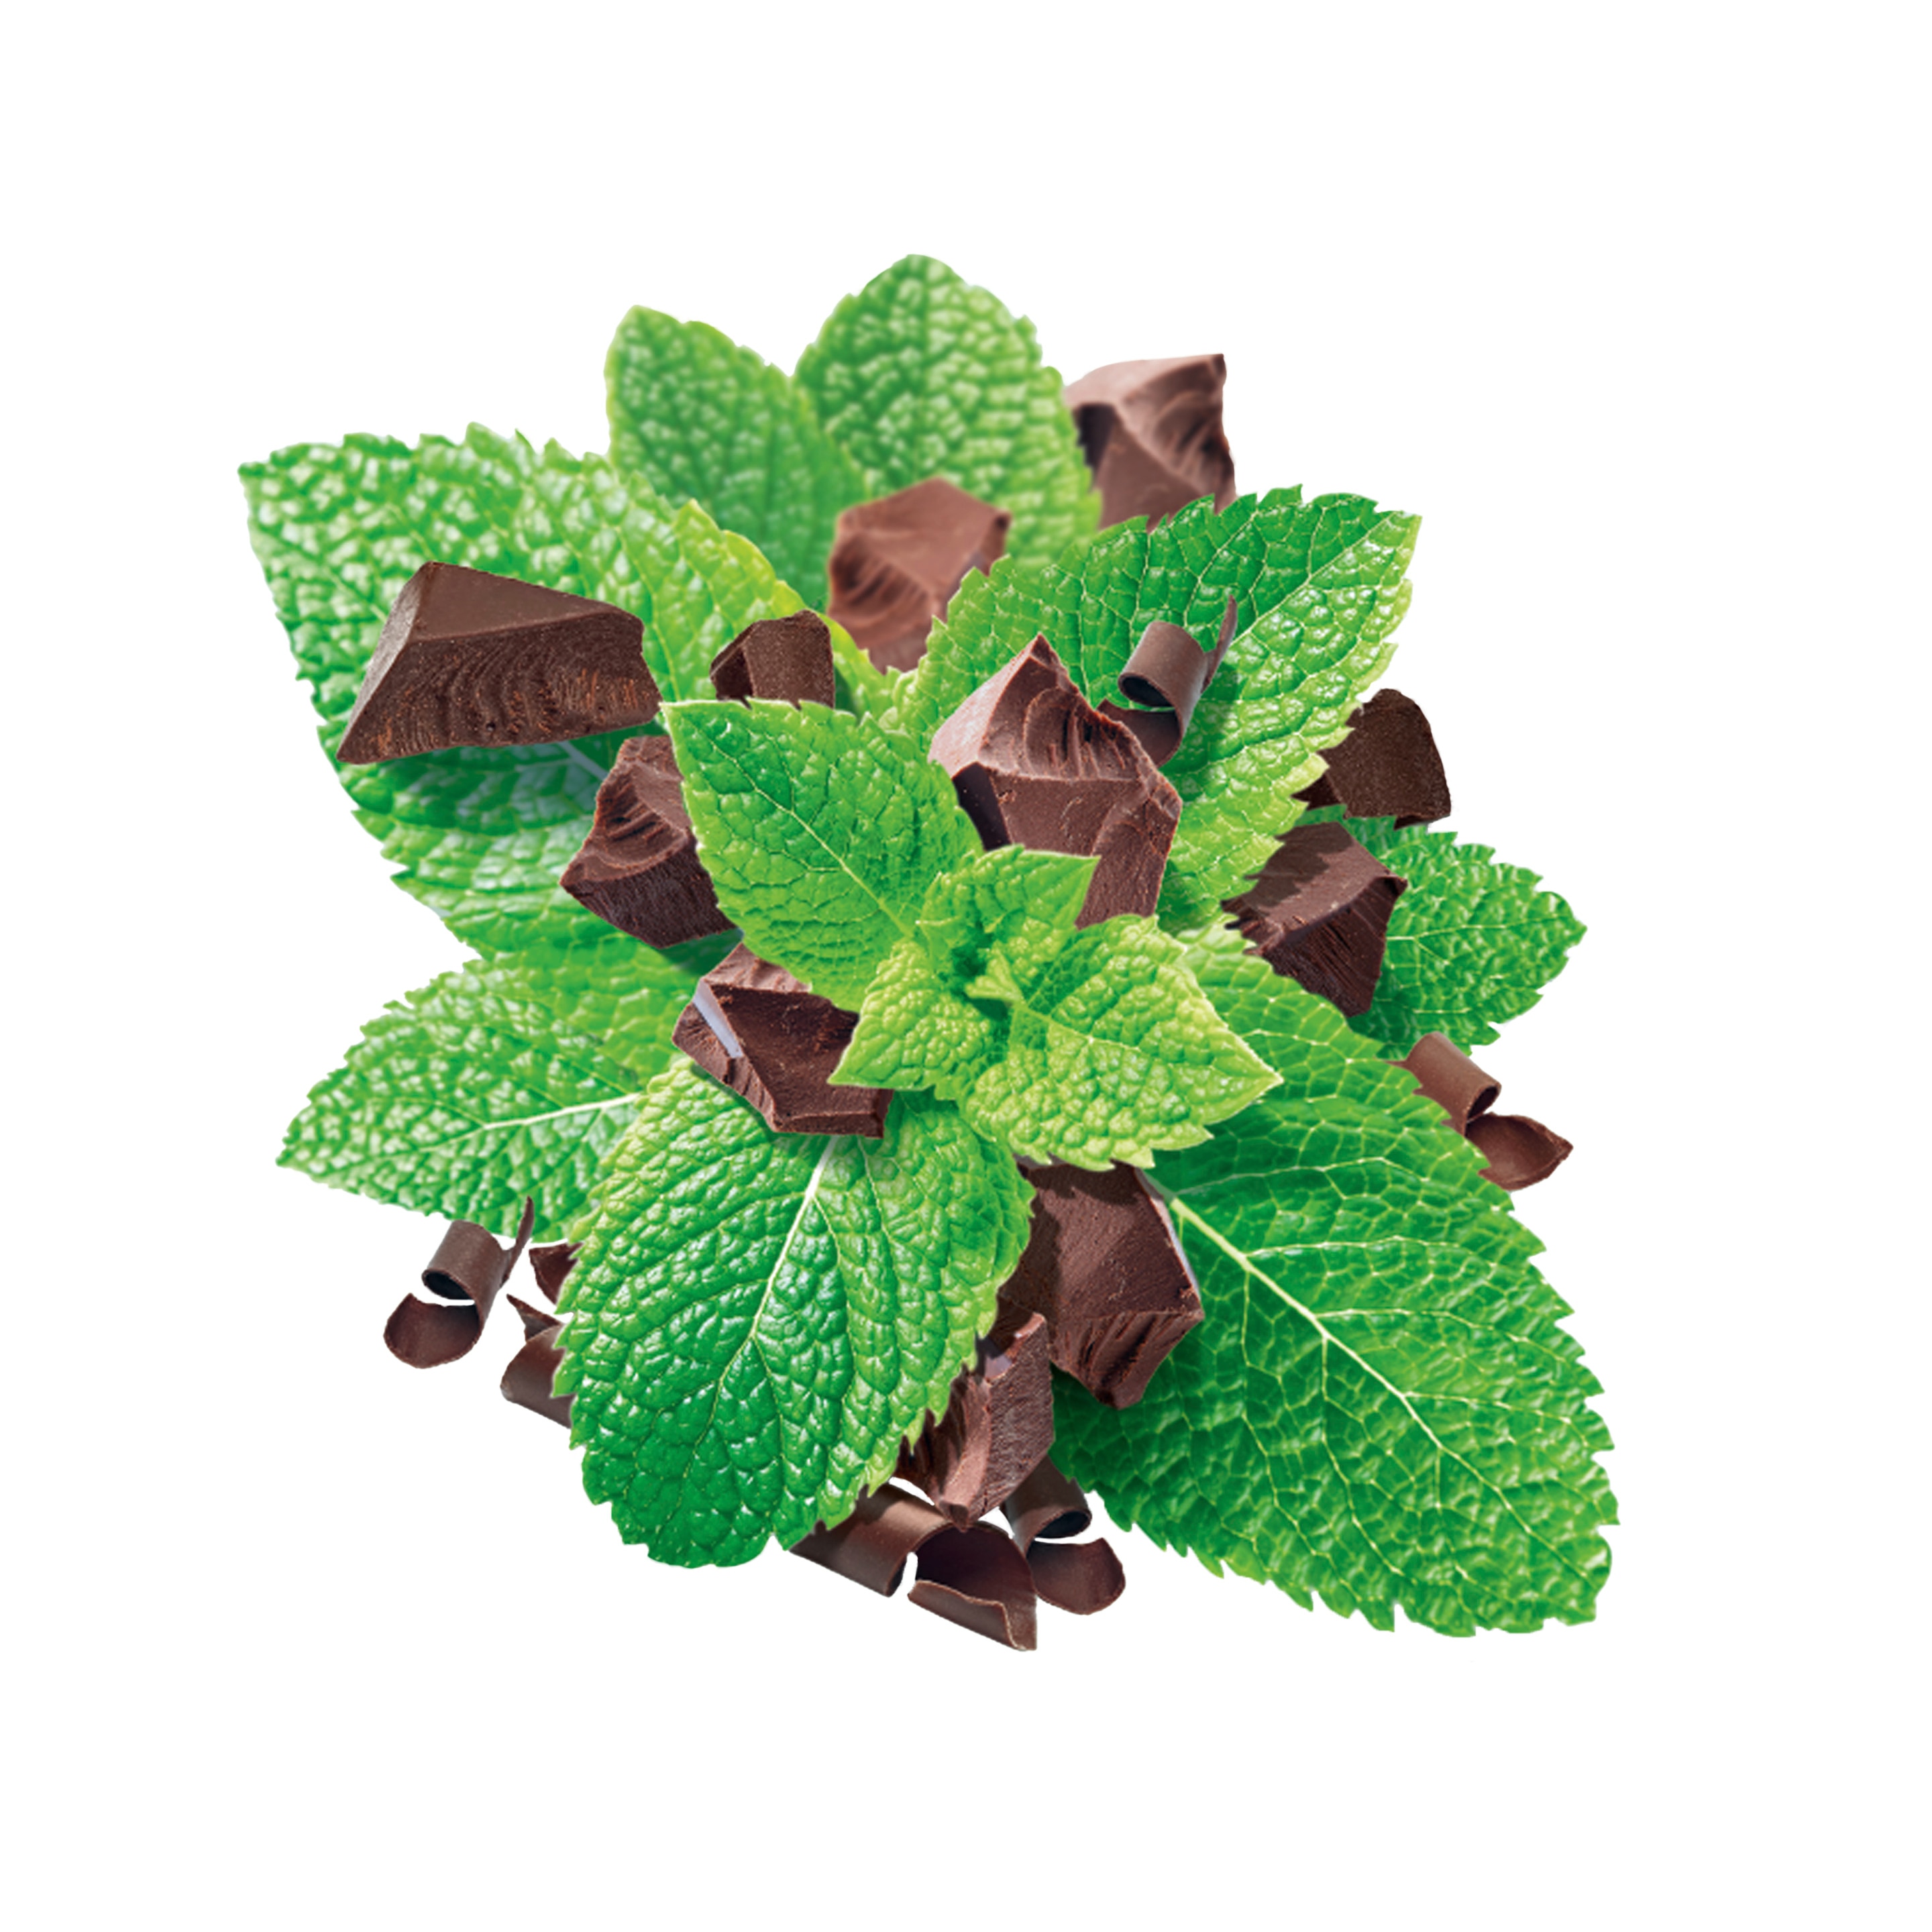 For our Mint Chocolate we source dark chocolate curls made with Rainforest Alliance Certified cocoa from Ghana